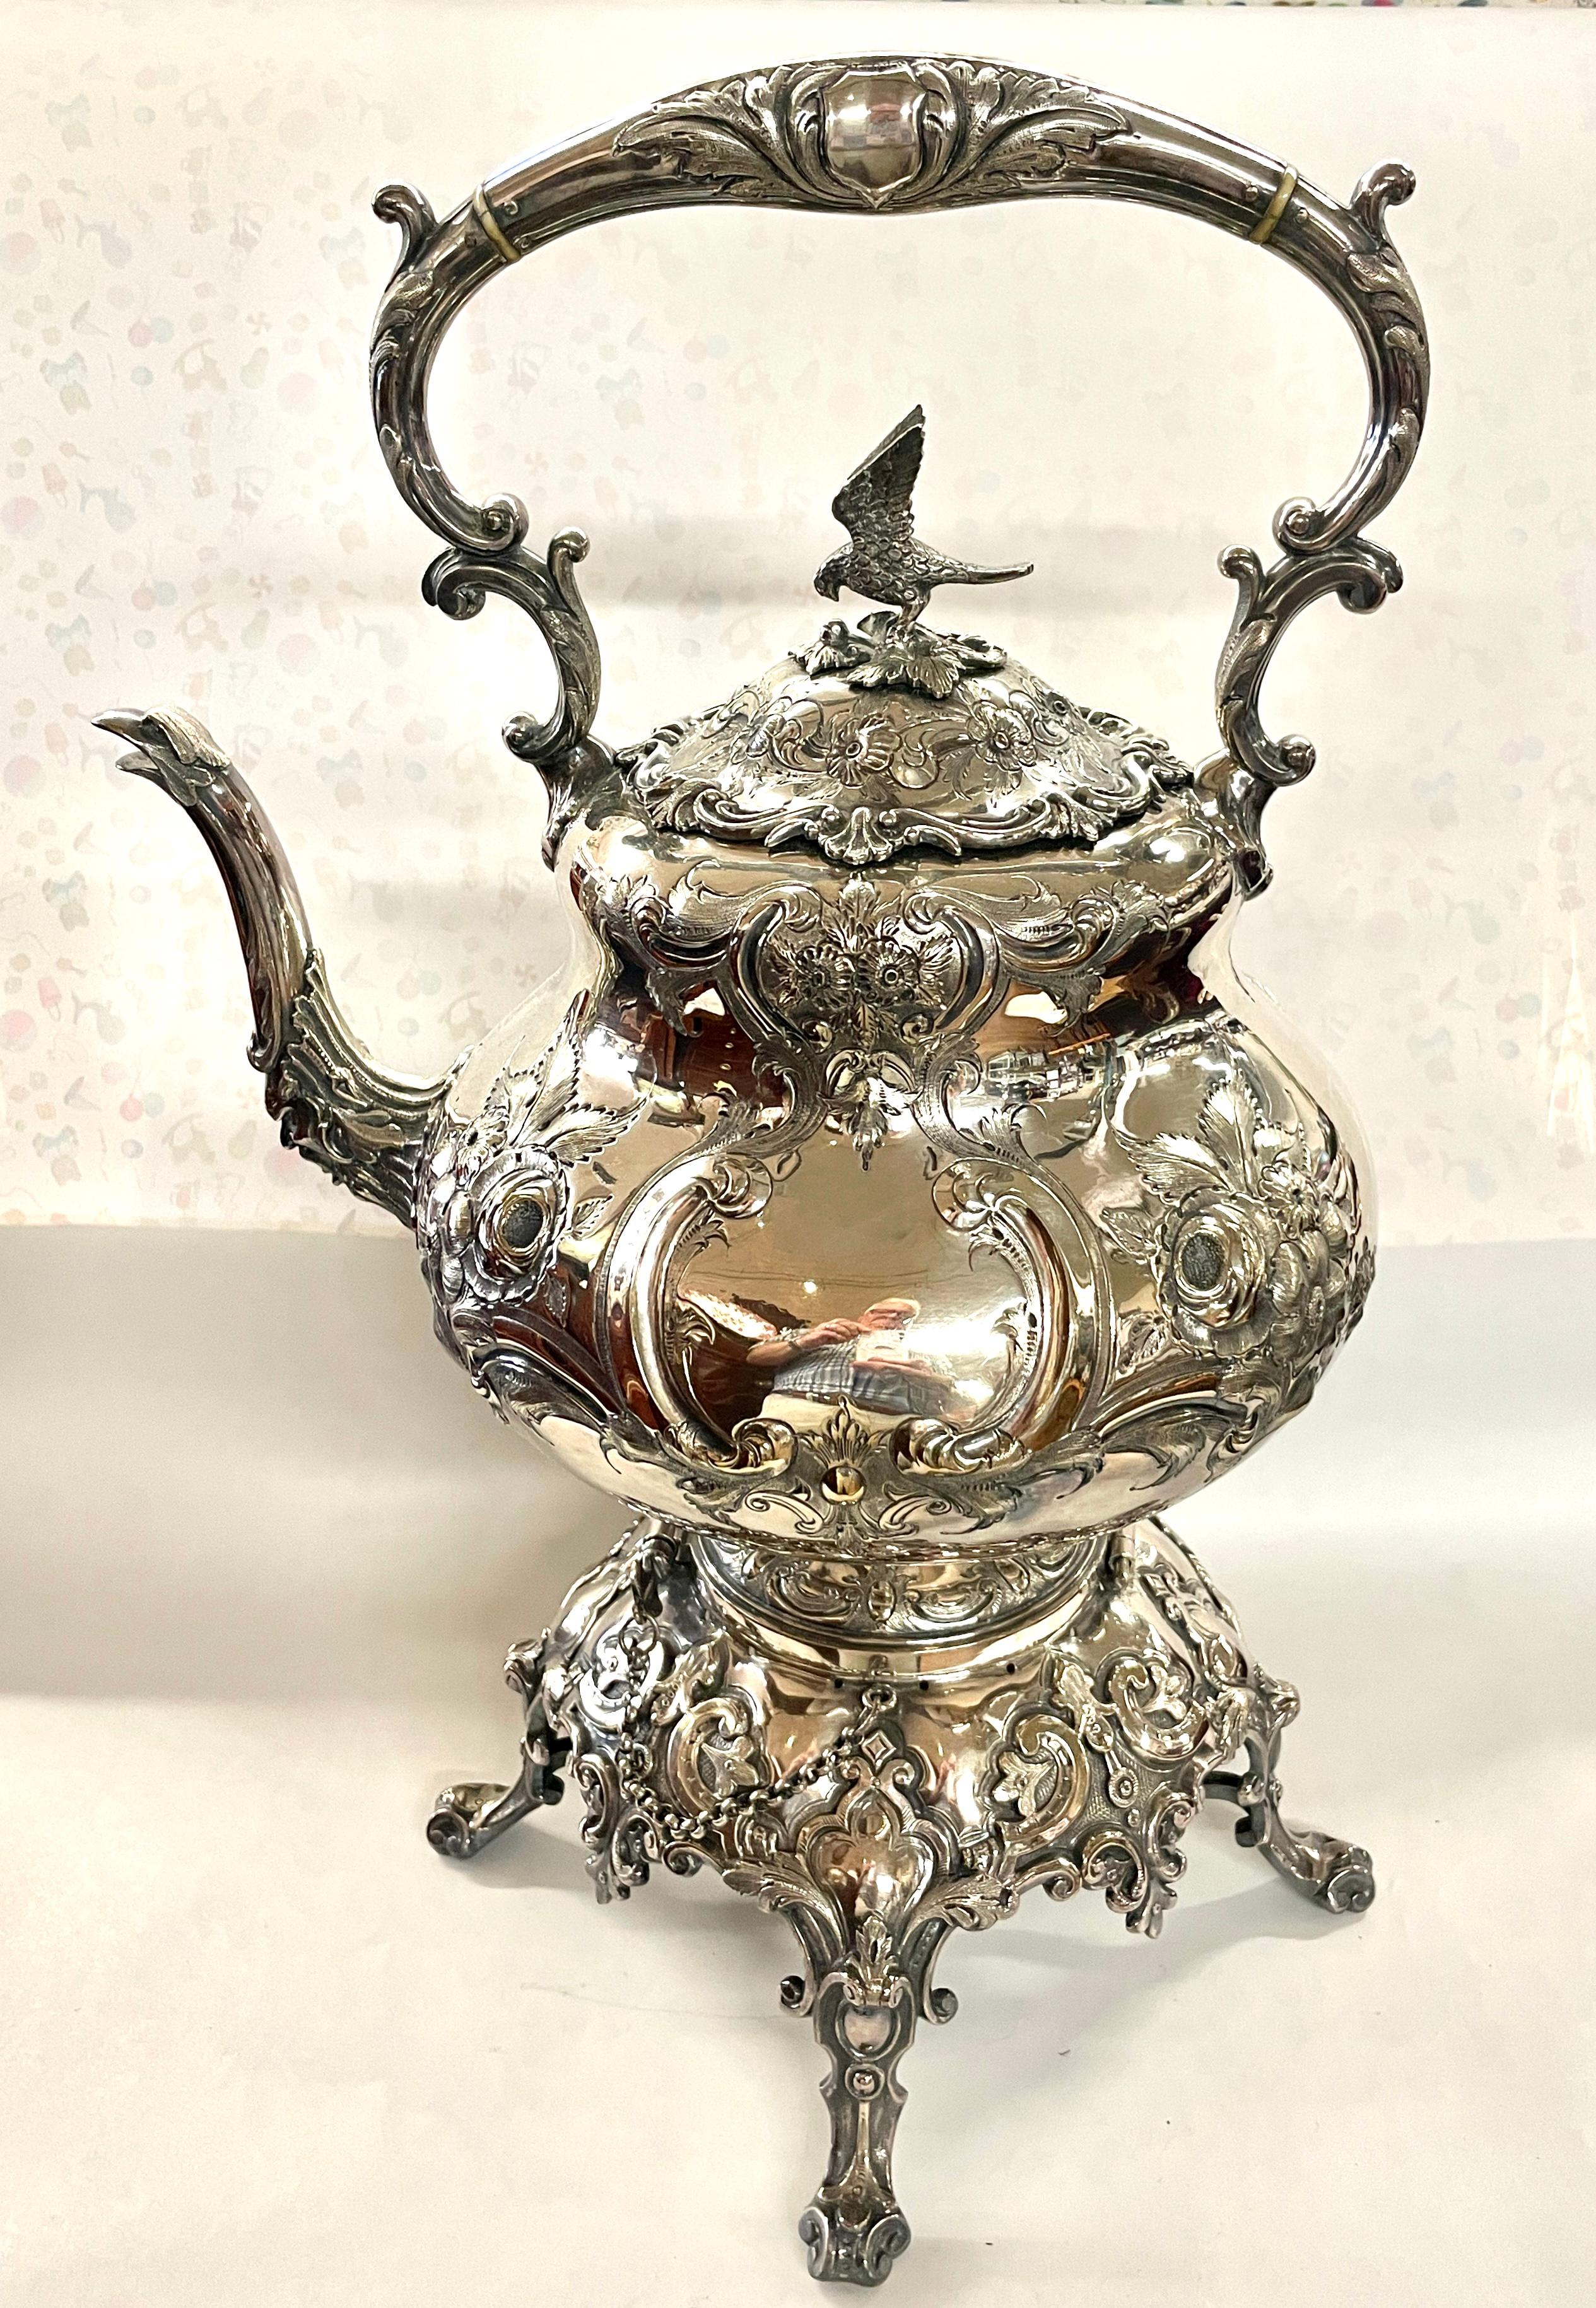 The FINEST Antique English Sheffield Silver Plate Louis Quatorze (XVI) Style Large Size Tipping Kettle on Stand.  The Kettle retains its original pins and chains for allowing the Kettle to be stationary or one pin can be removed to tip the kettle